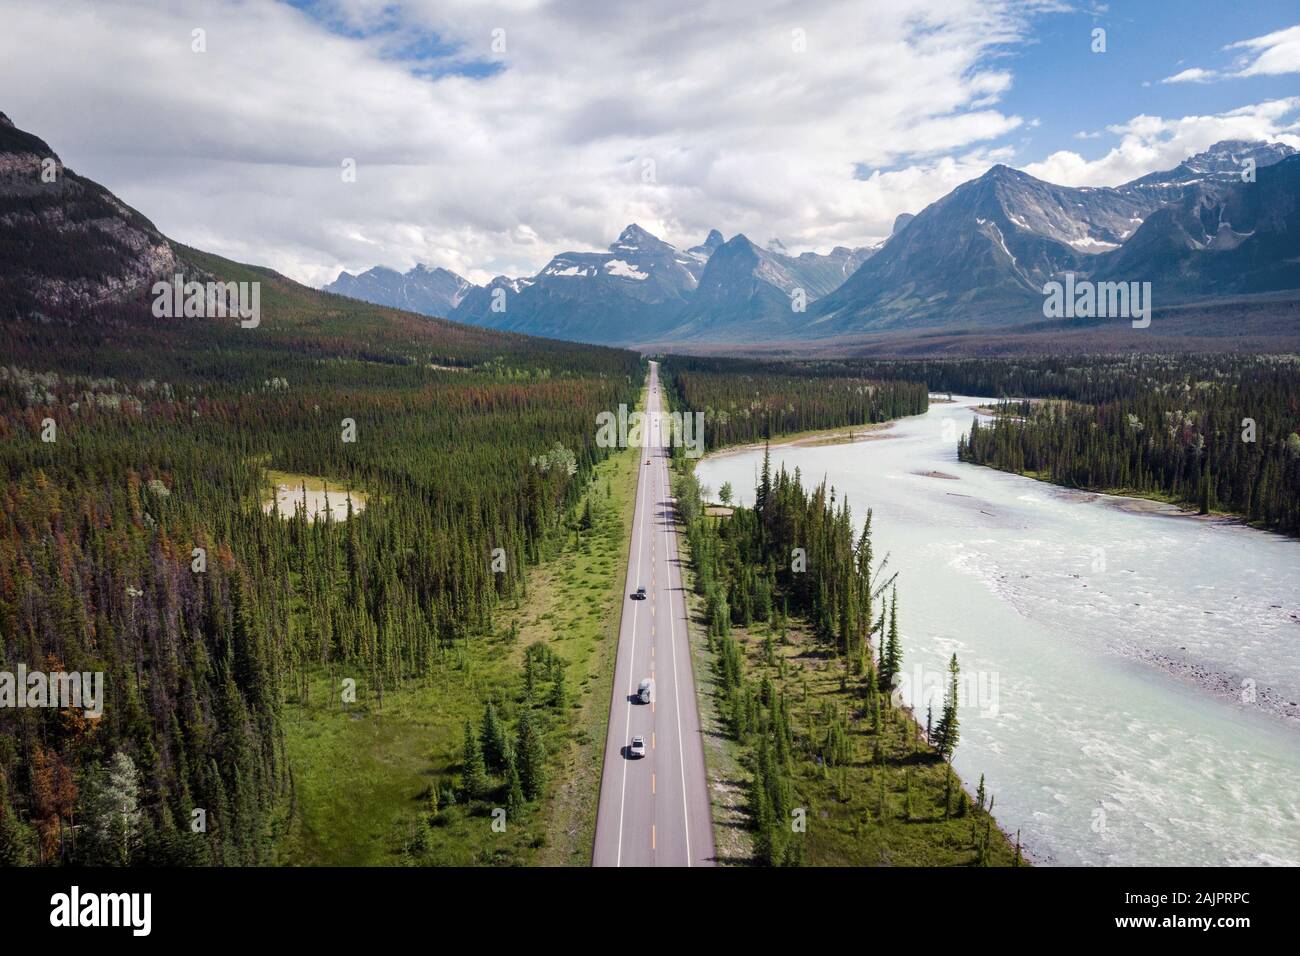 Aerial view of the famous Icefields Parkway road between Banff and Jasper National Parks in Alberta, Canada. Stock Photo